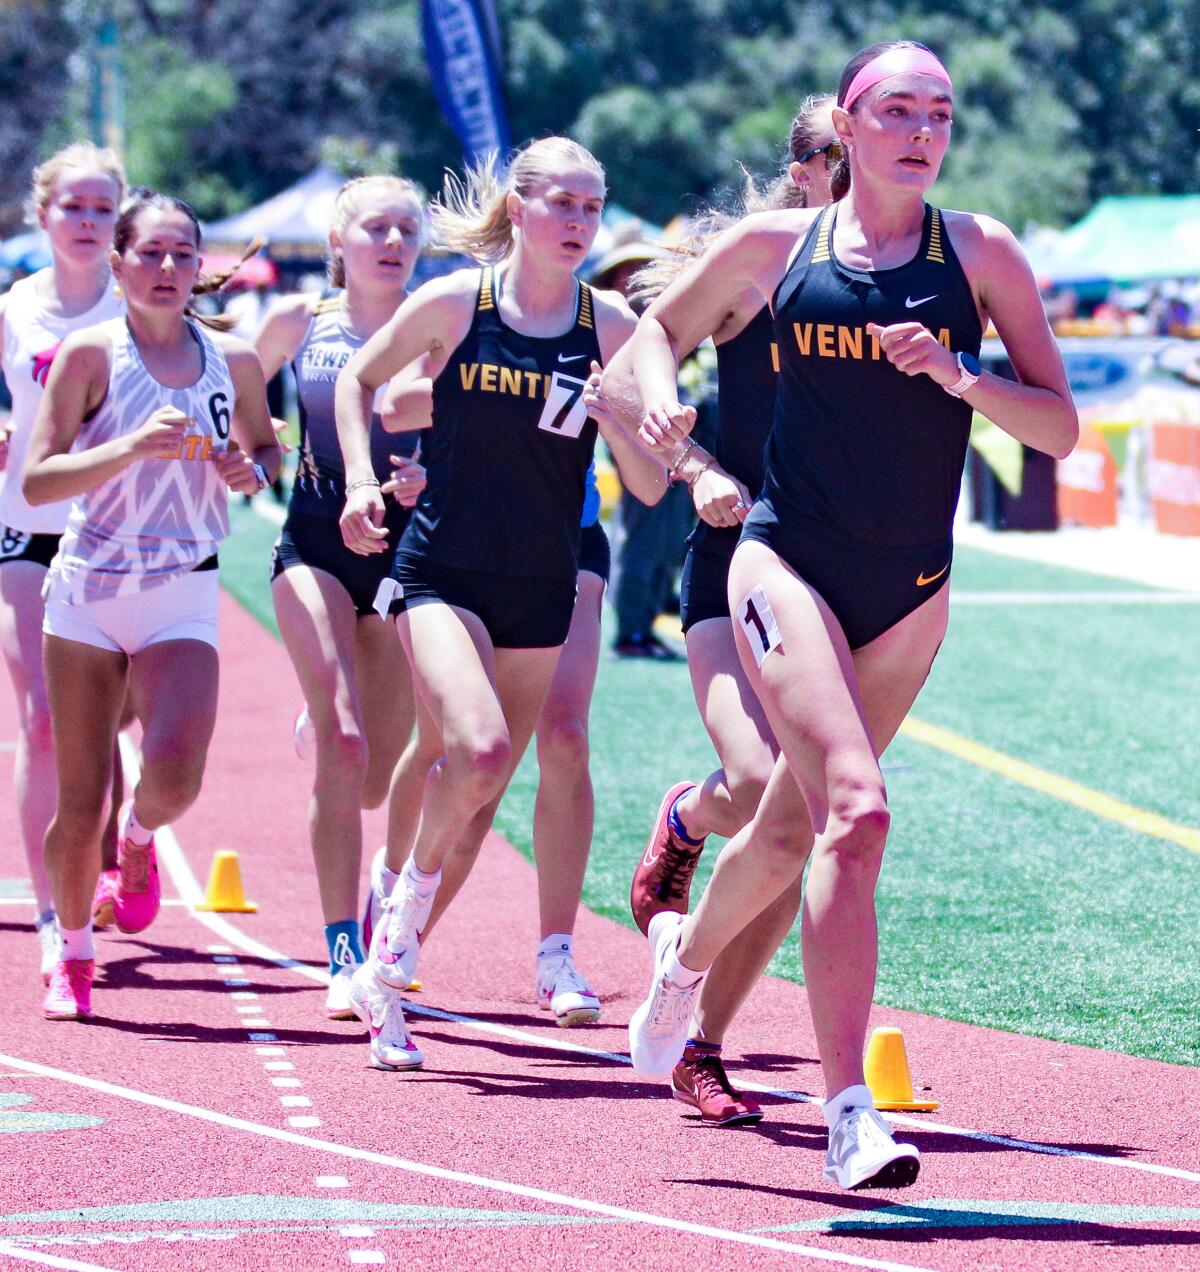 Sadie Engelhardt of Ventura won her third straight Division 2 1,600, leading the pack on the turn.